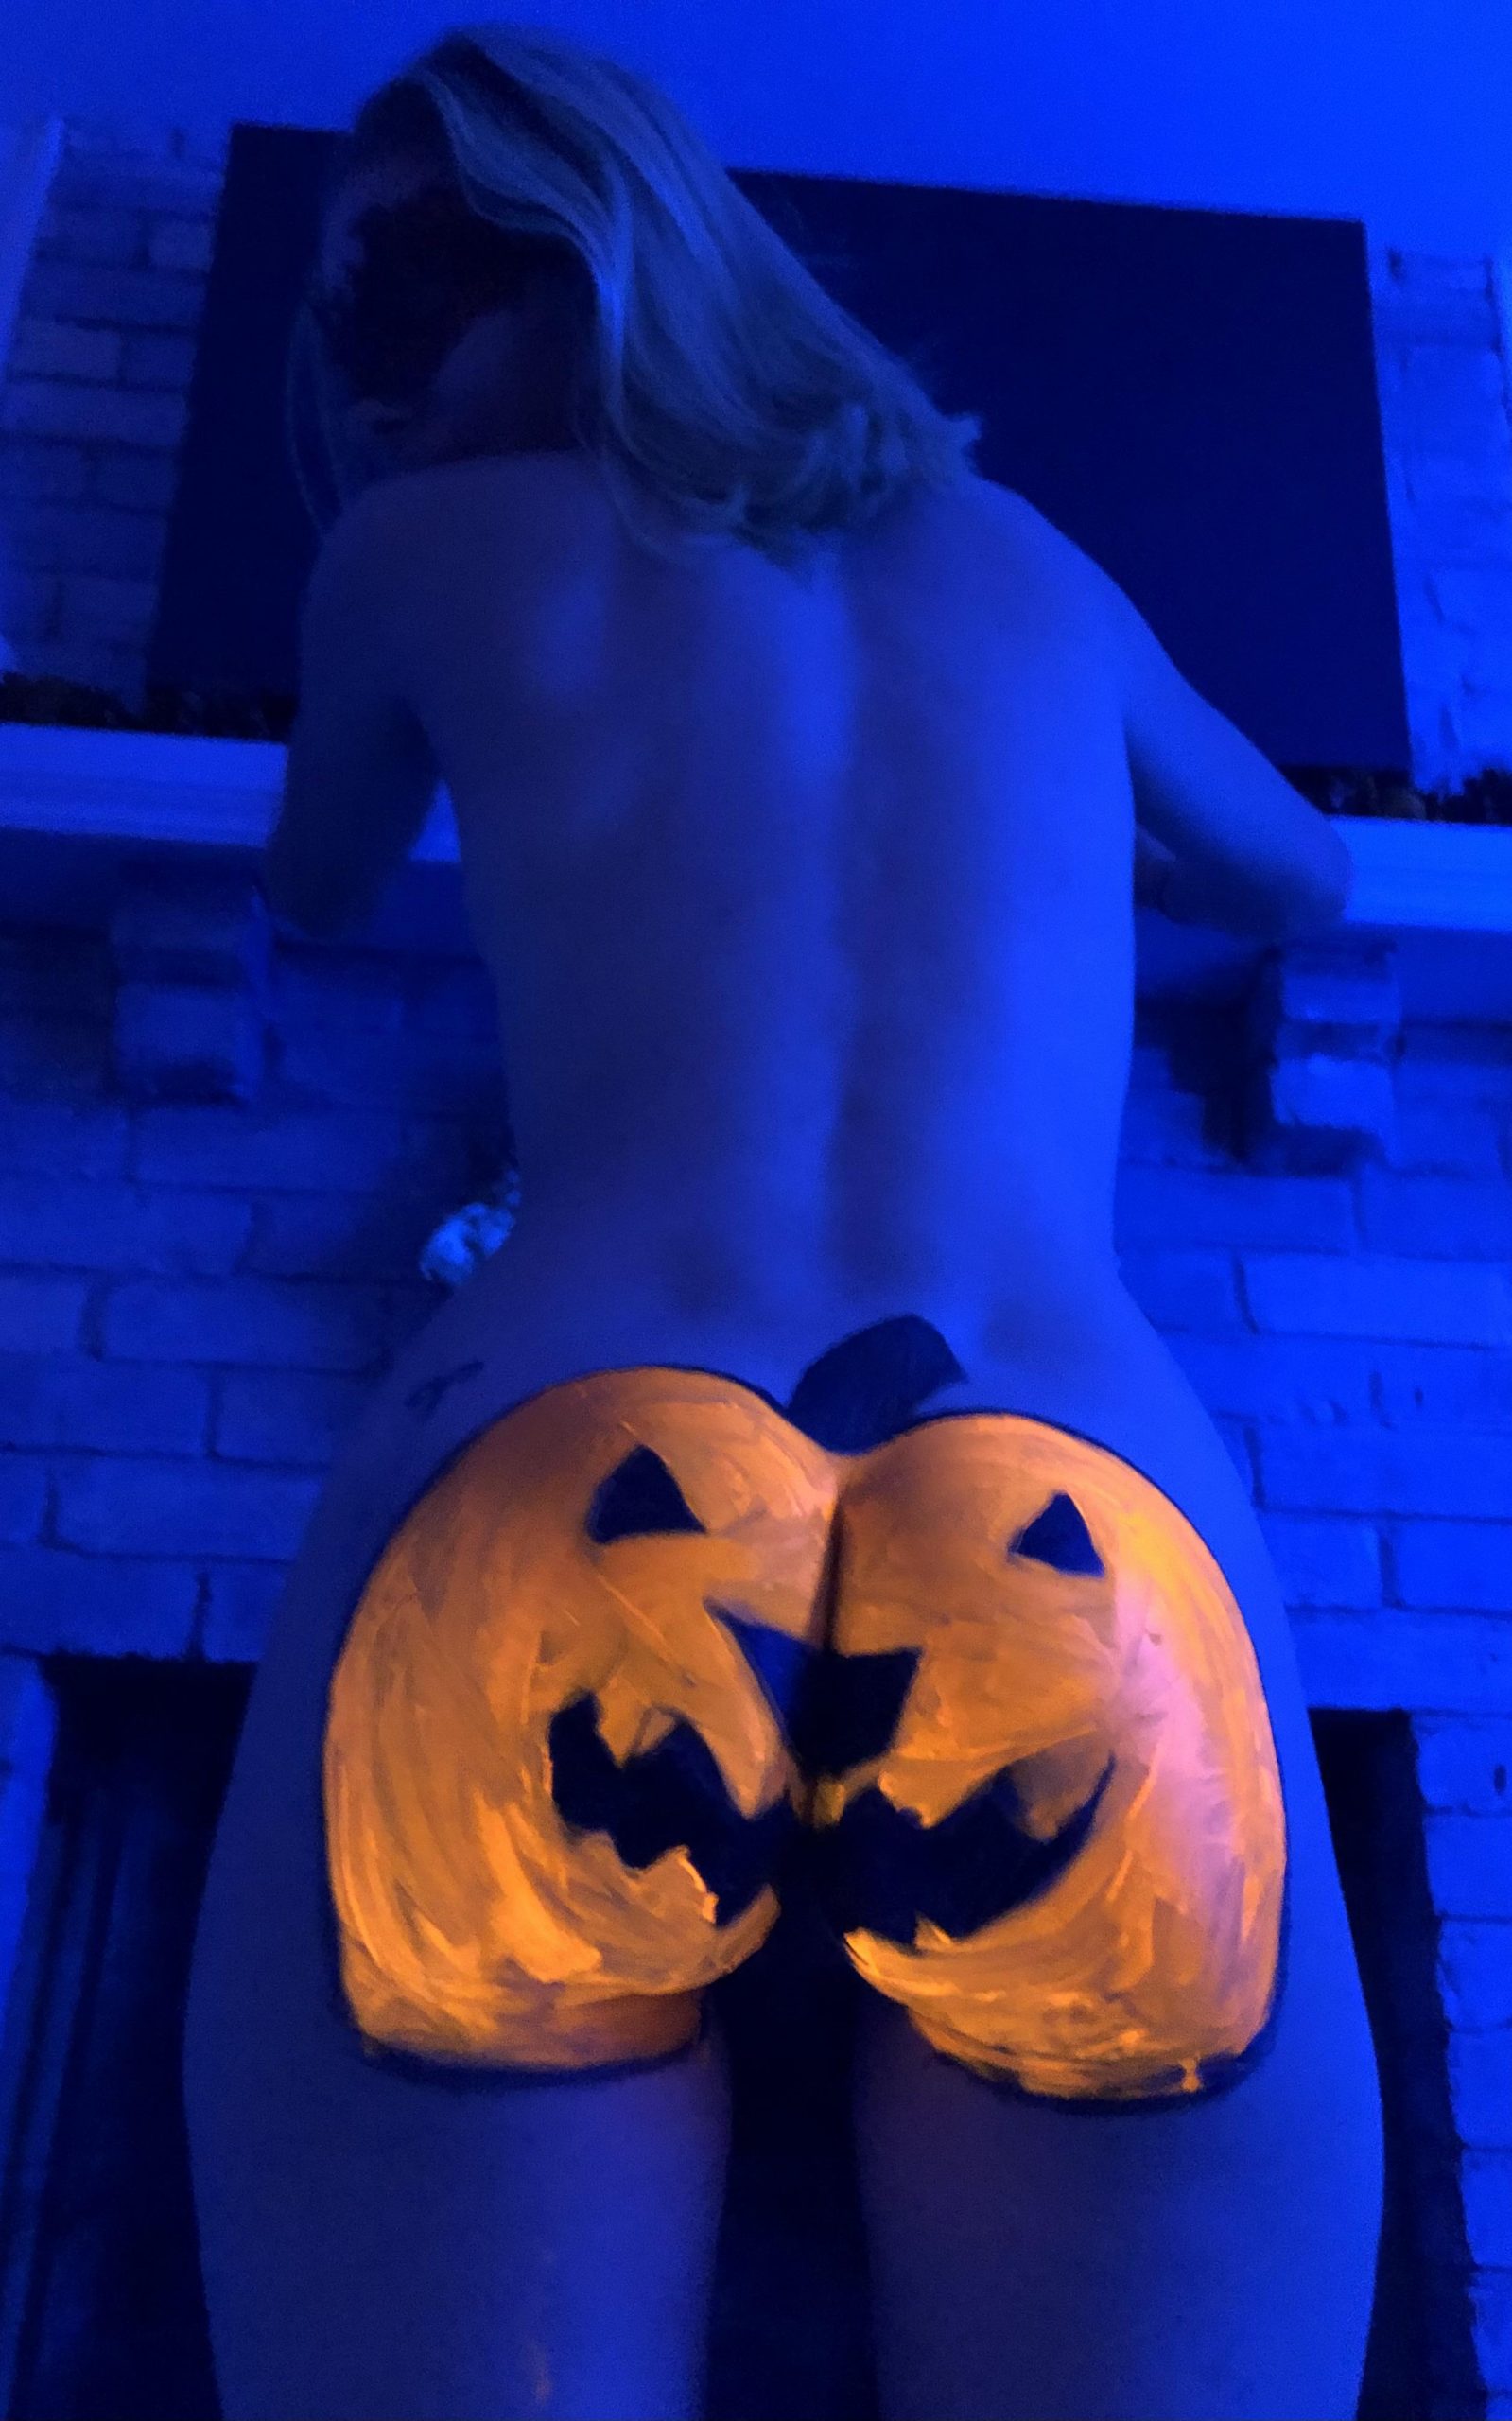 My 34y/o MIL Butt Is Super Excited For Halloween